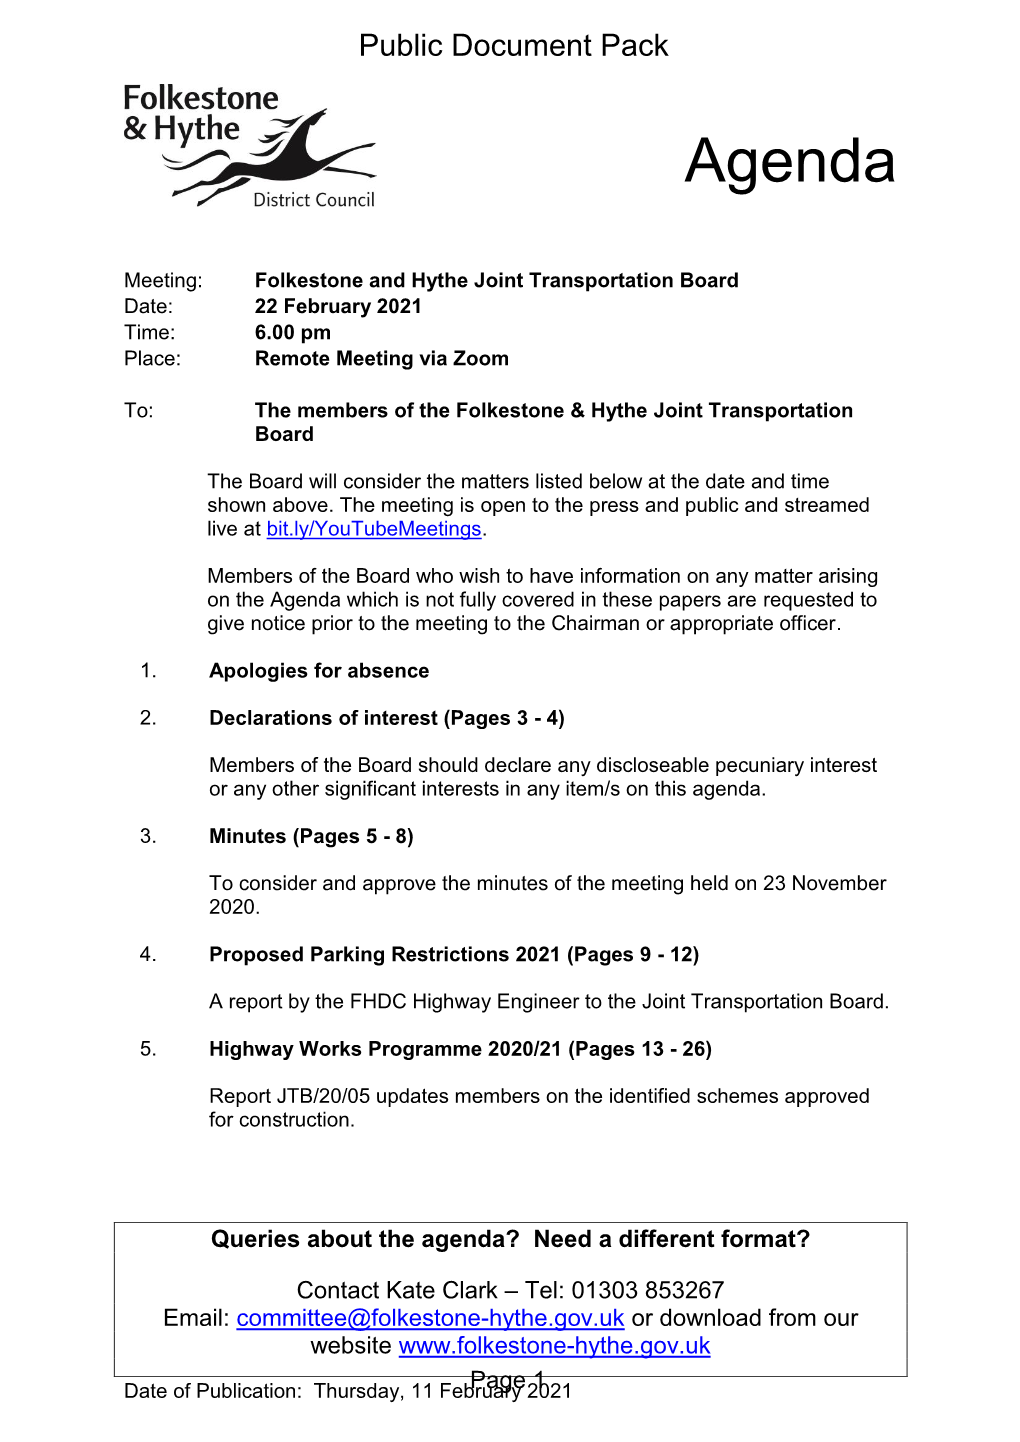 (Public Pack)Agenda Document for Folkestone and Hythe Joint